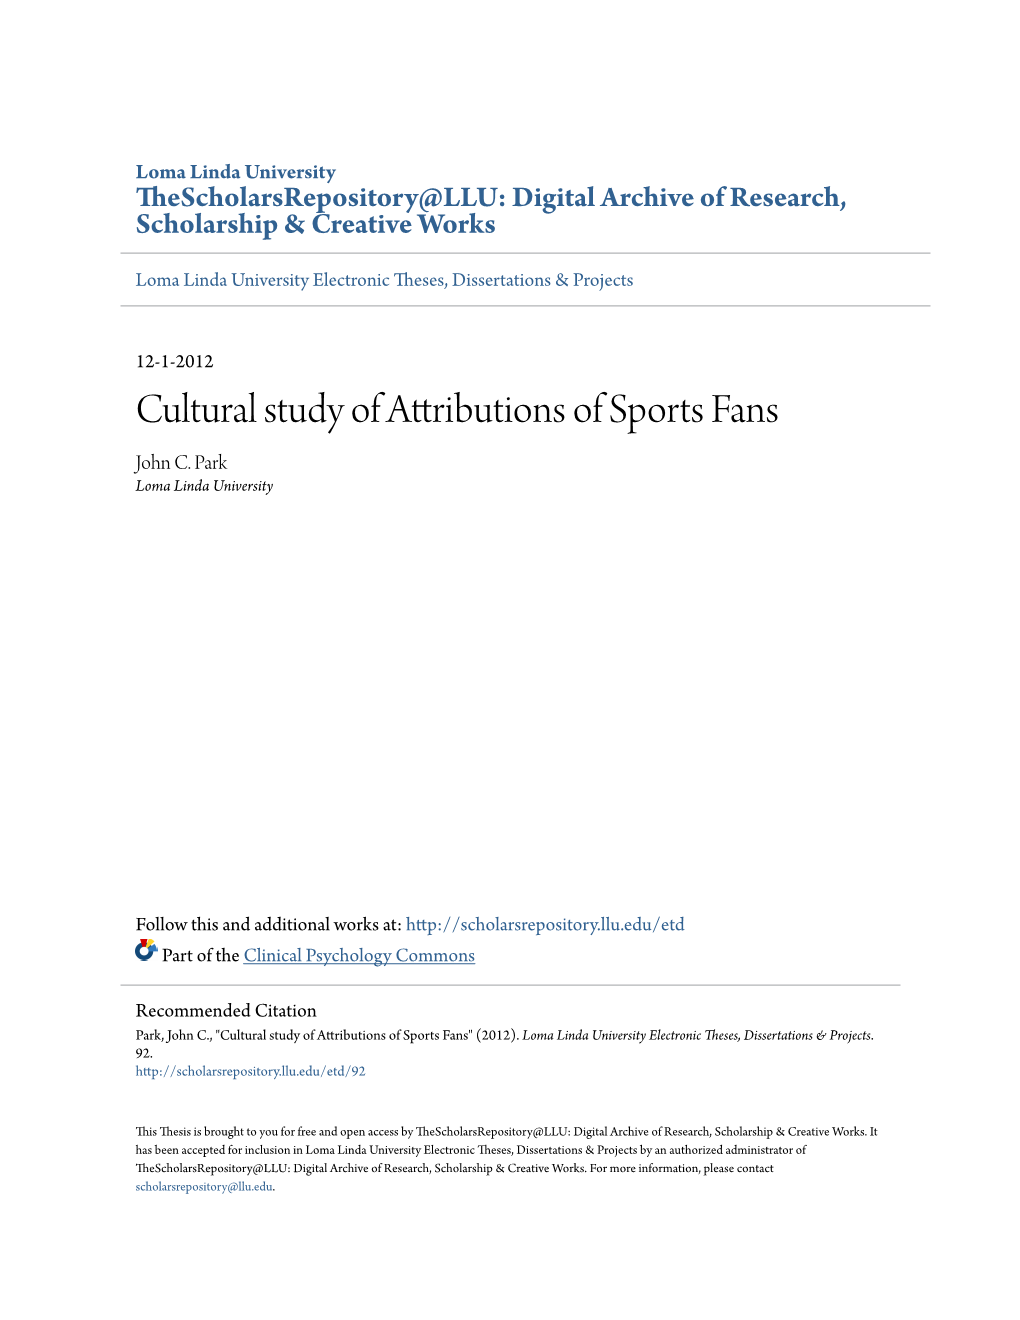 Cultural Study of Attributions of Sports Fans John C